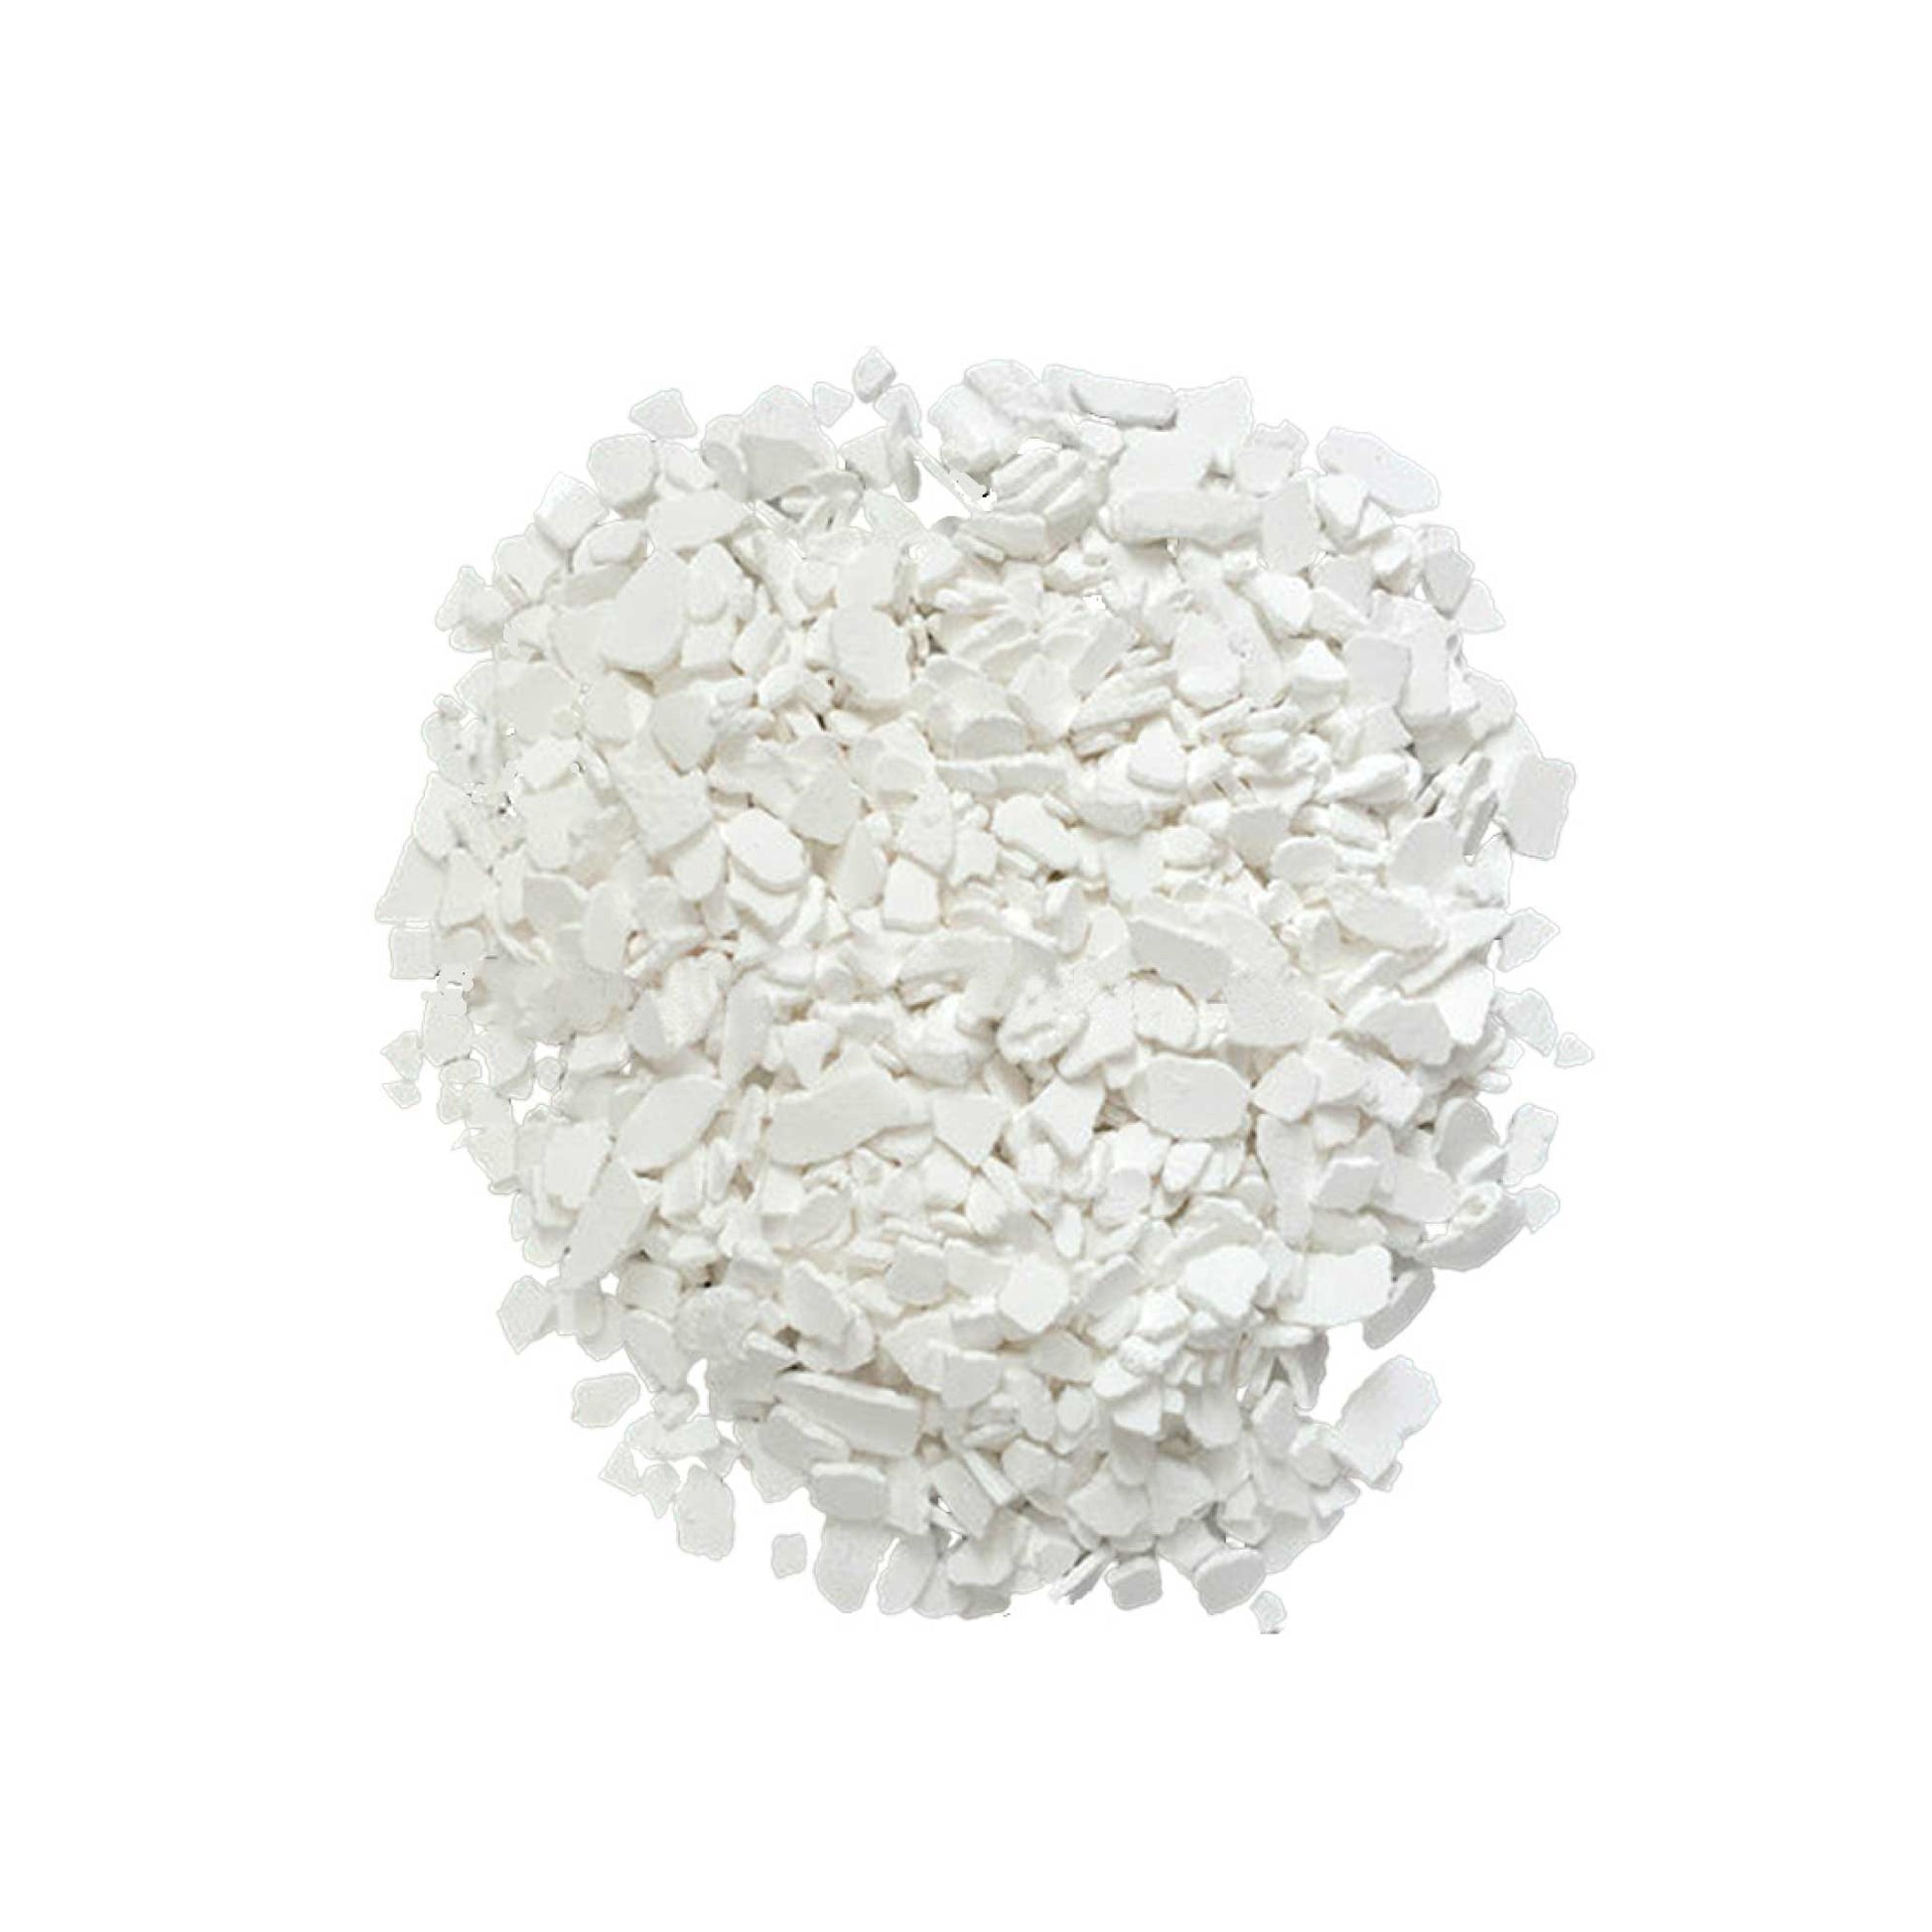 Calcium Chloride Flakes Tubs CaCl2 FCC 77% Food Soluble Cheese Making Beer Bulk